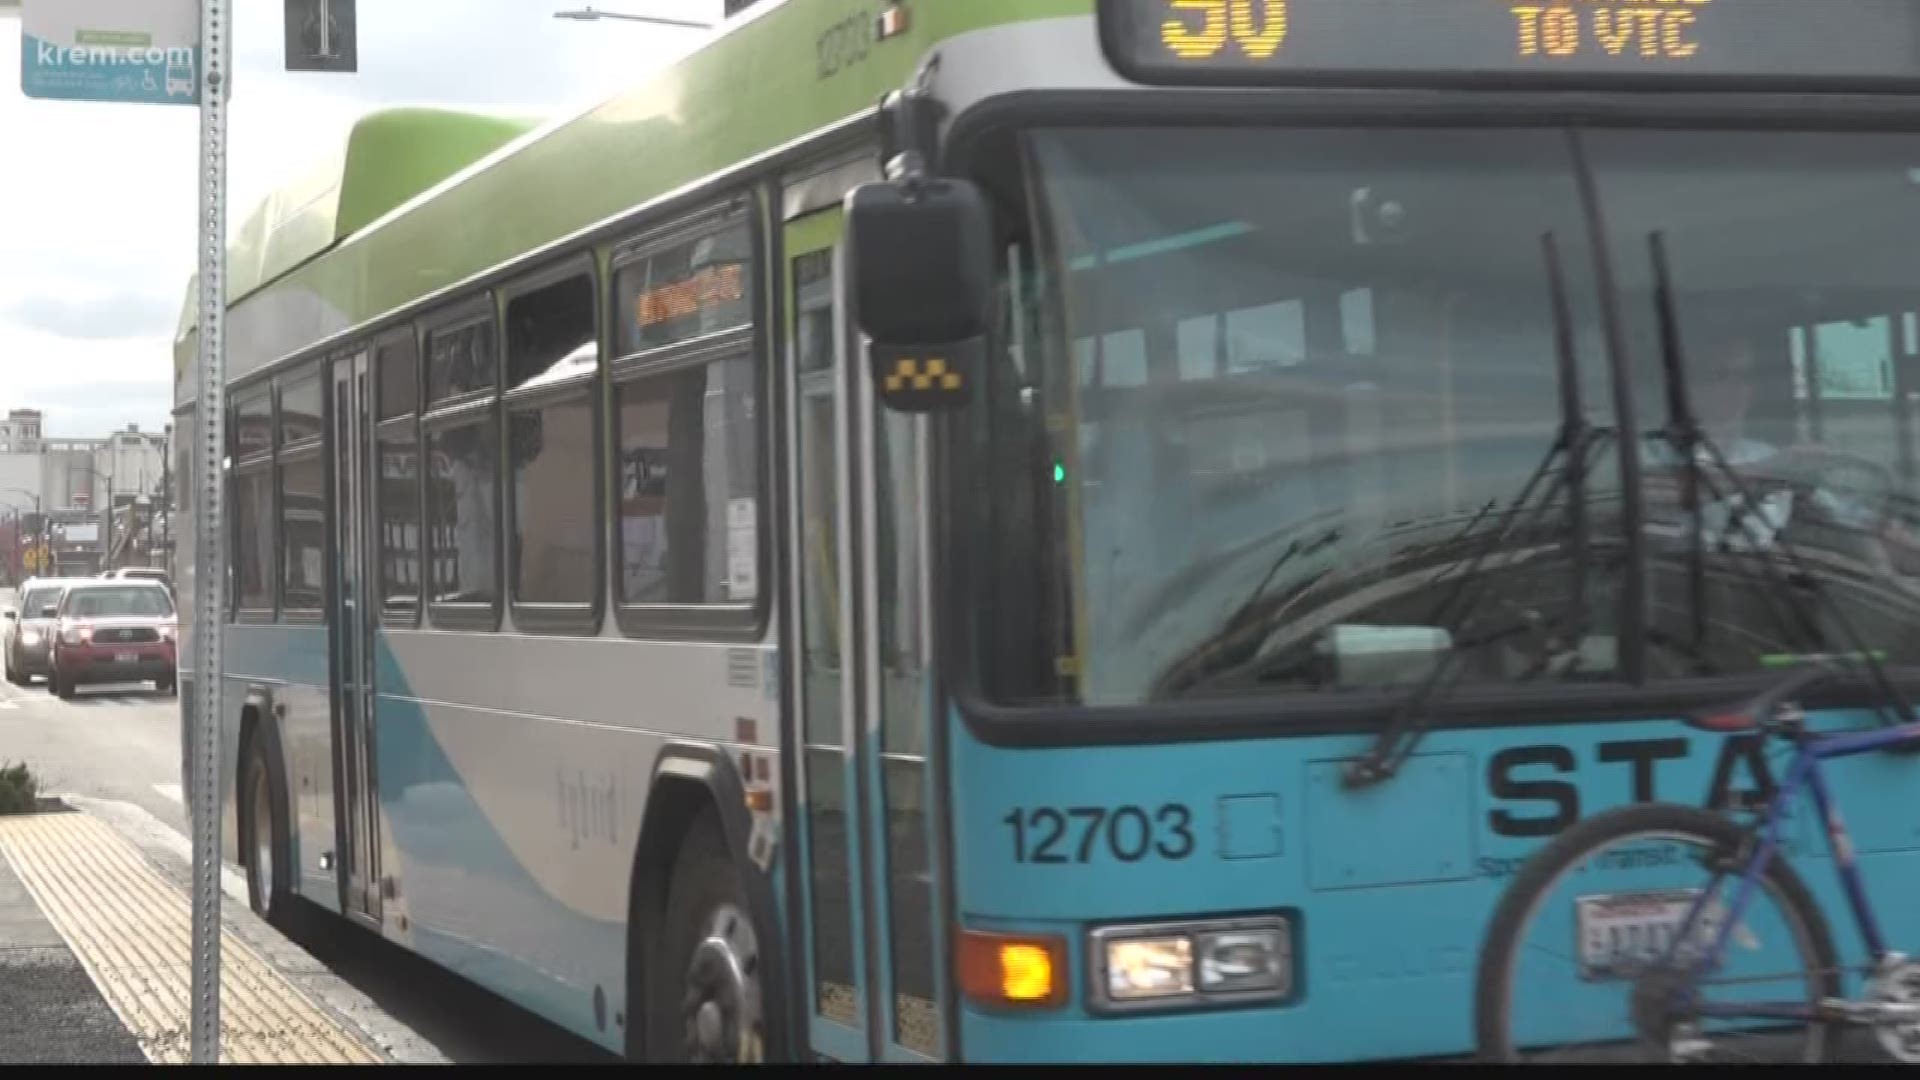 Several businesses along the East Sprague corridor asked STA to change the stops, saying they cause traffic issues. STA says the buses aren't the problem.